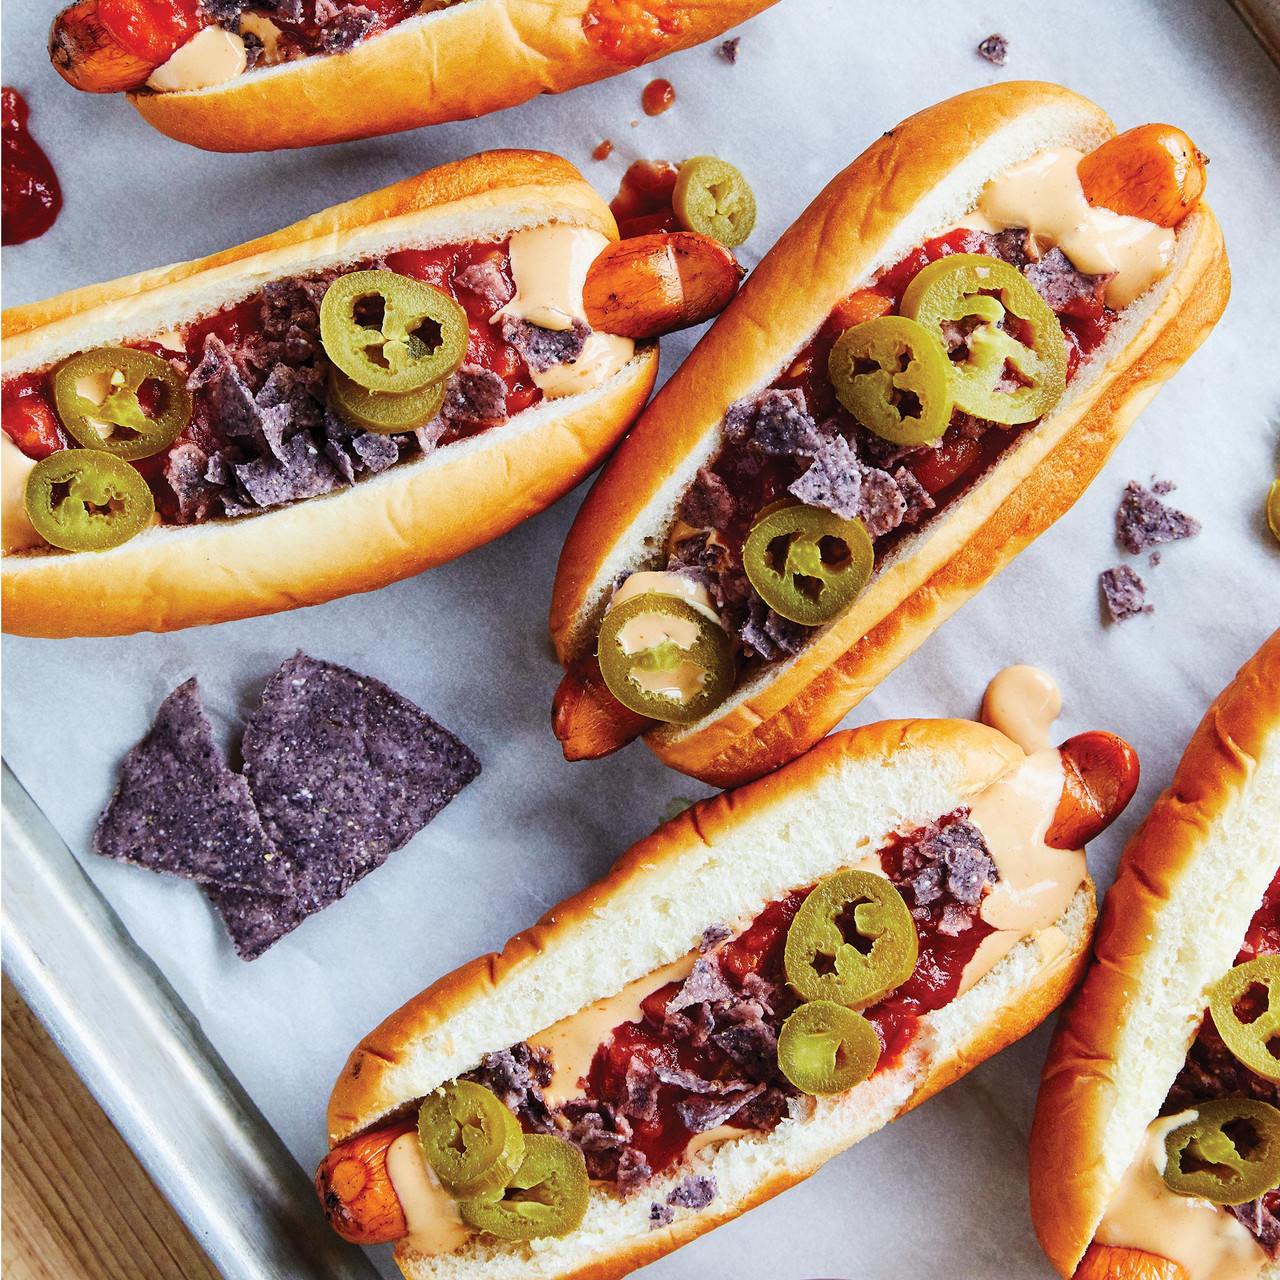 hotdog sandwiches topped with jalapeno and crushed chips